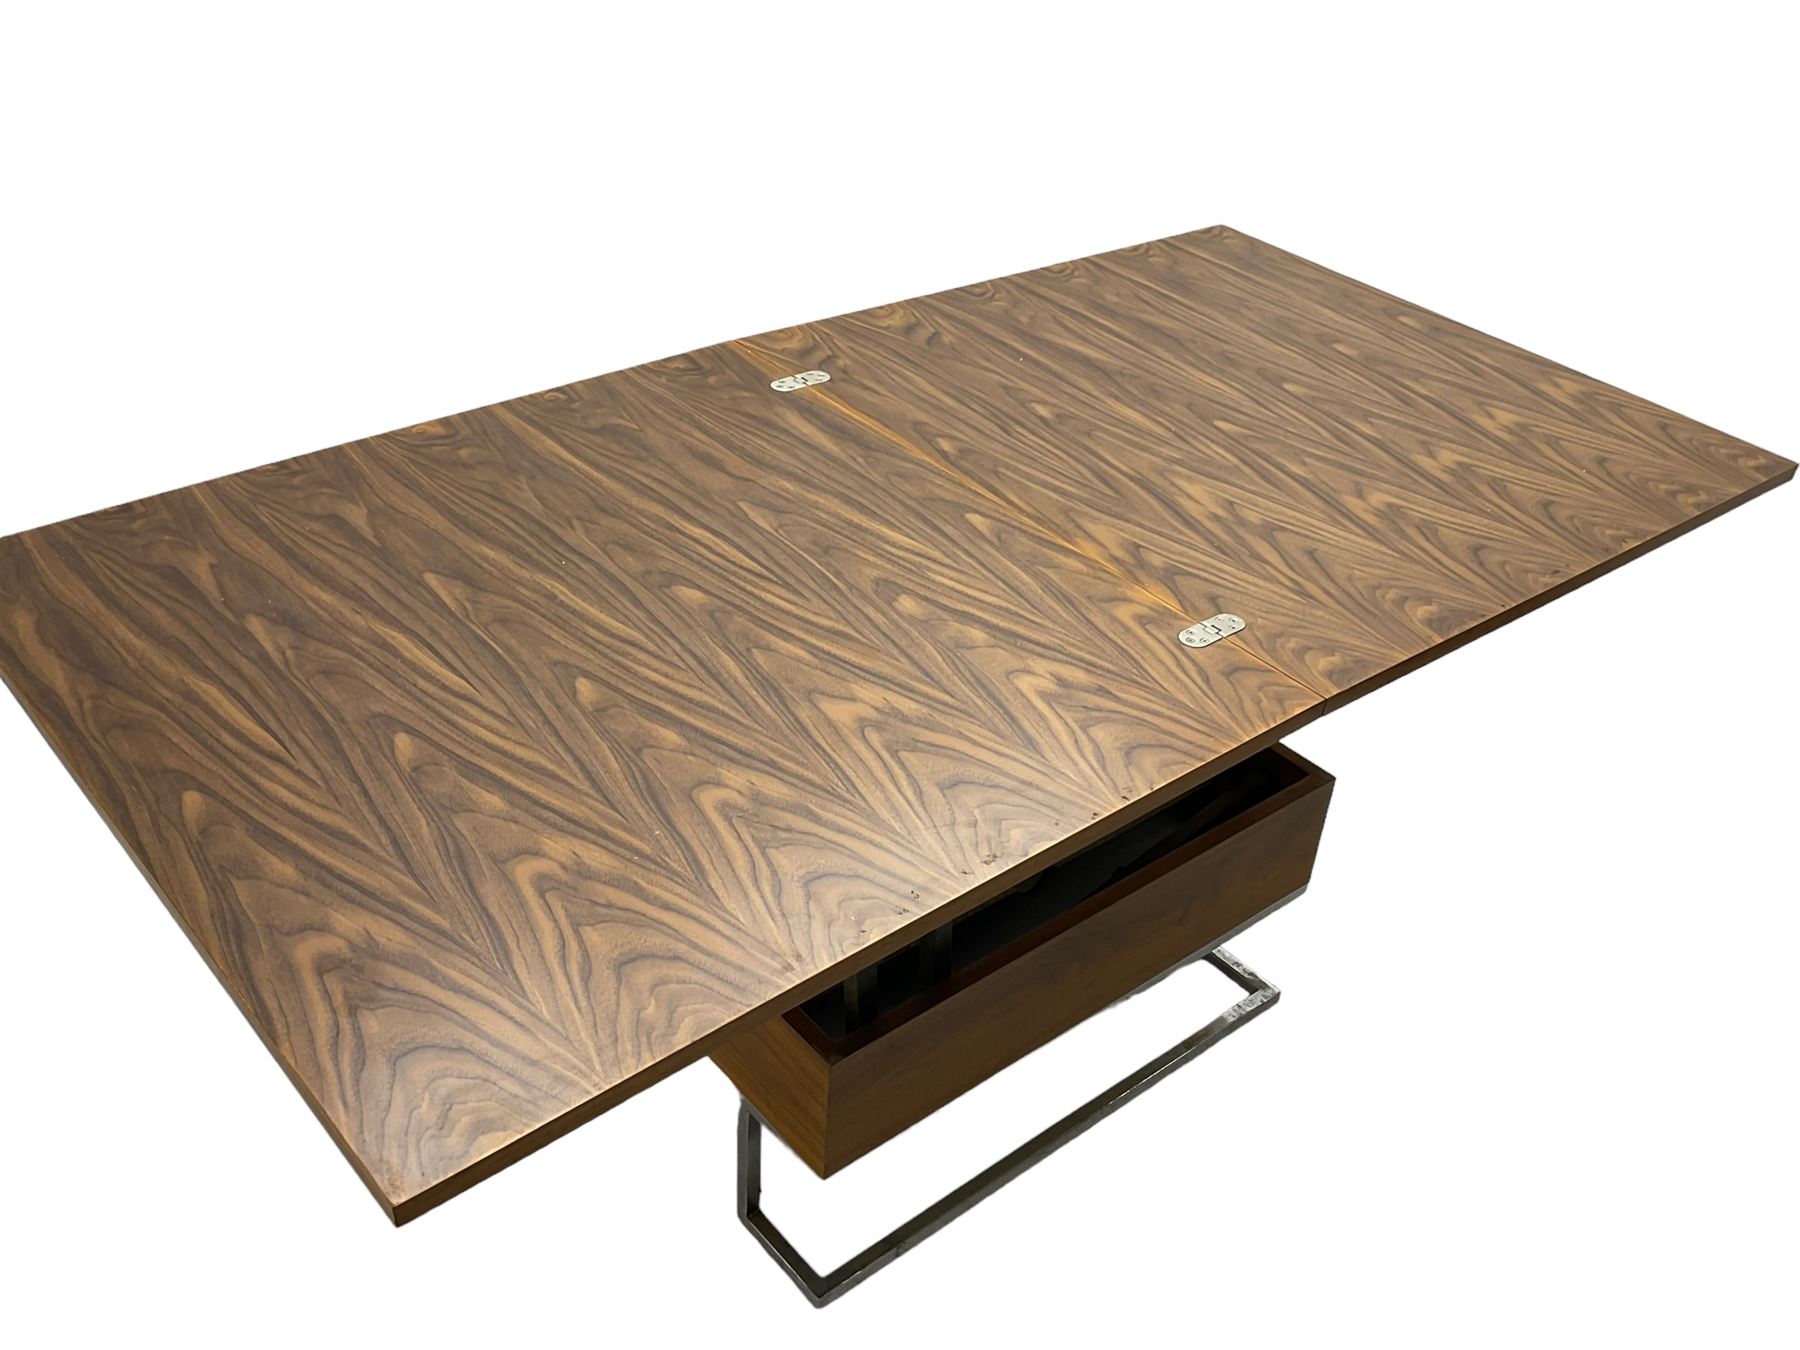 Contemporary walnut metamorphic coffee or dining table - Image 6 of 7